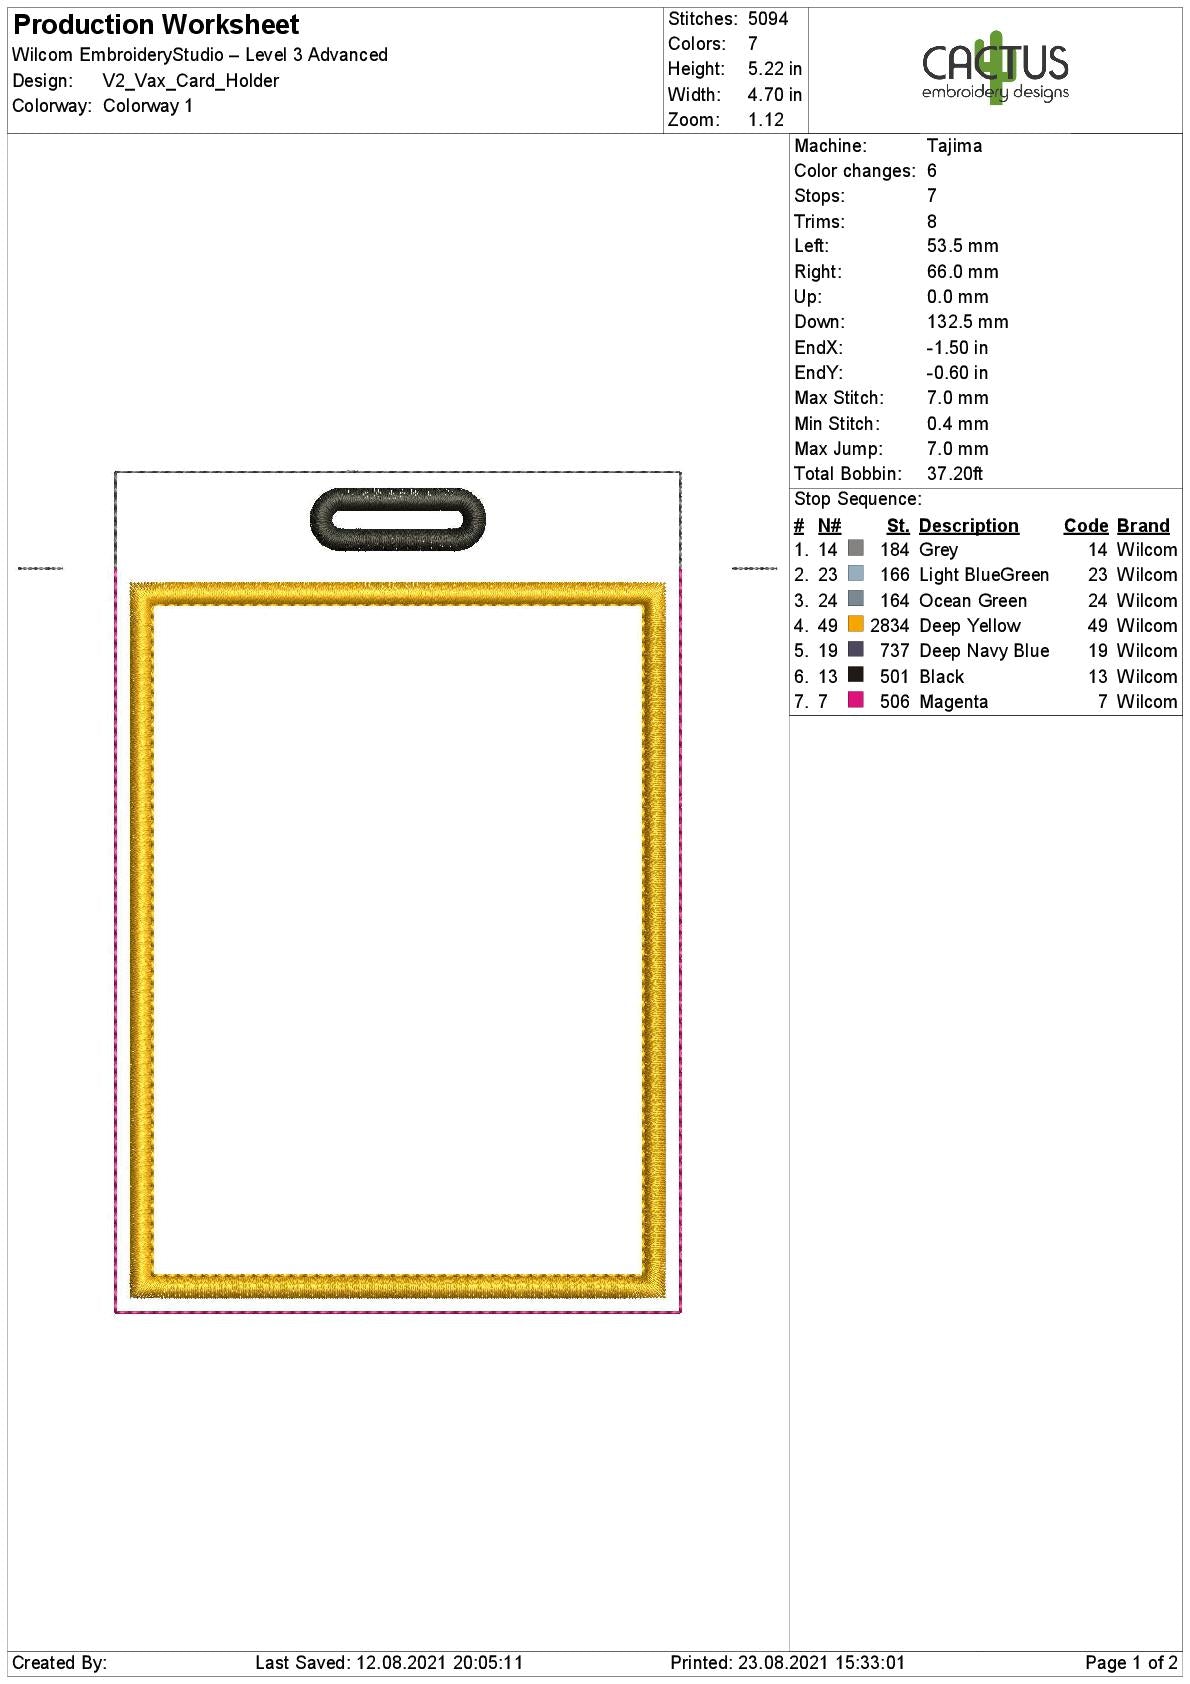 Blank Applique ID and Vax Card Holder